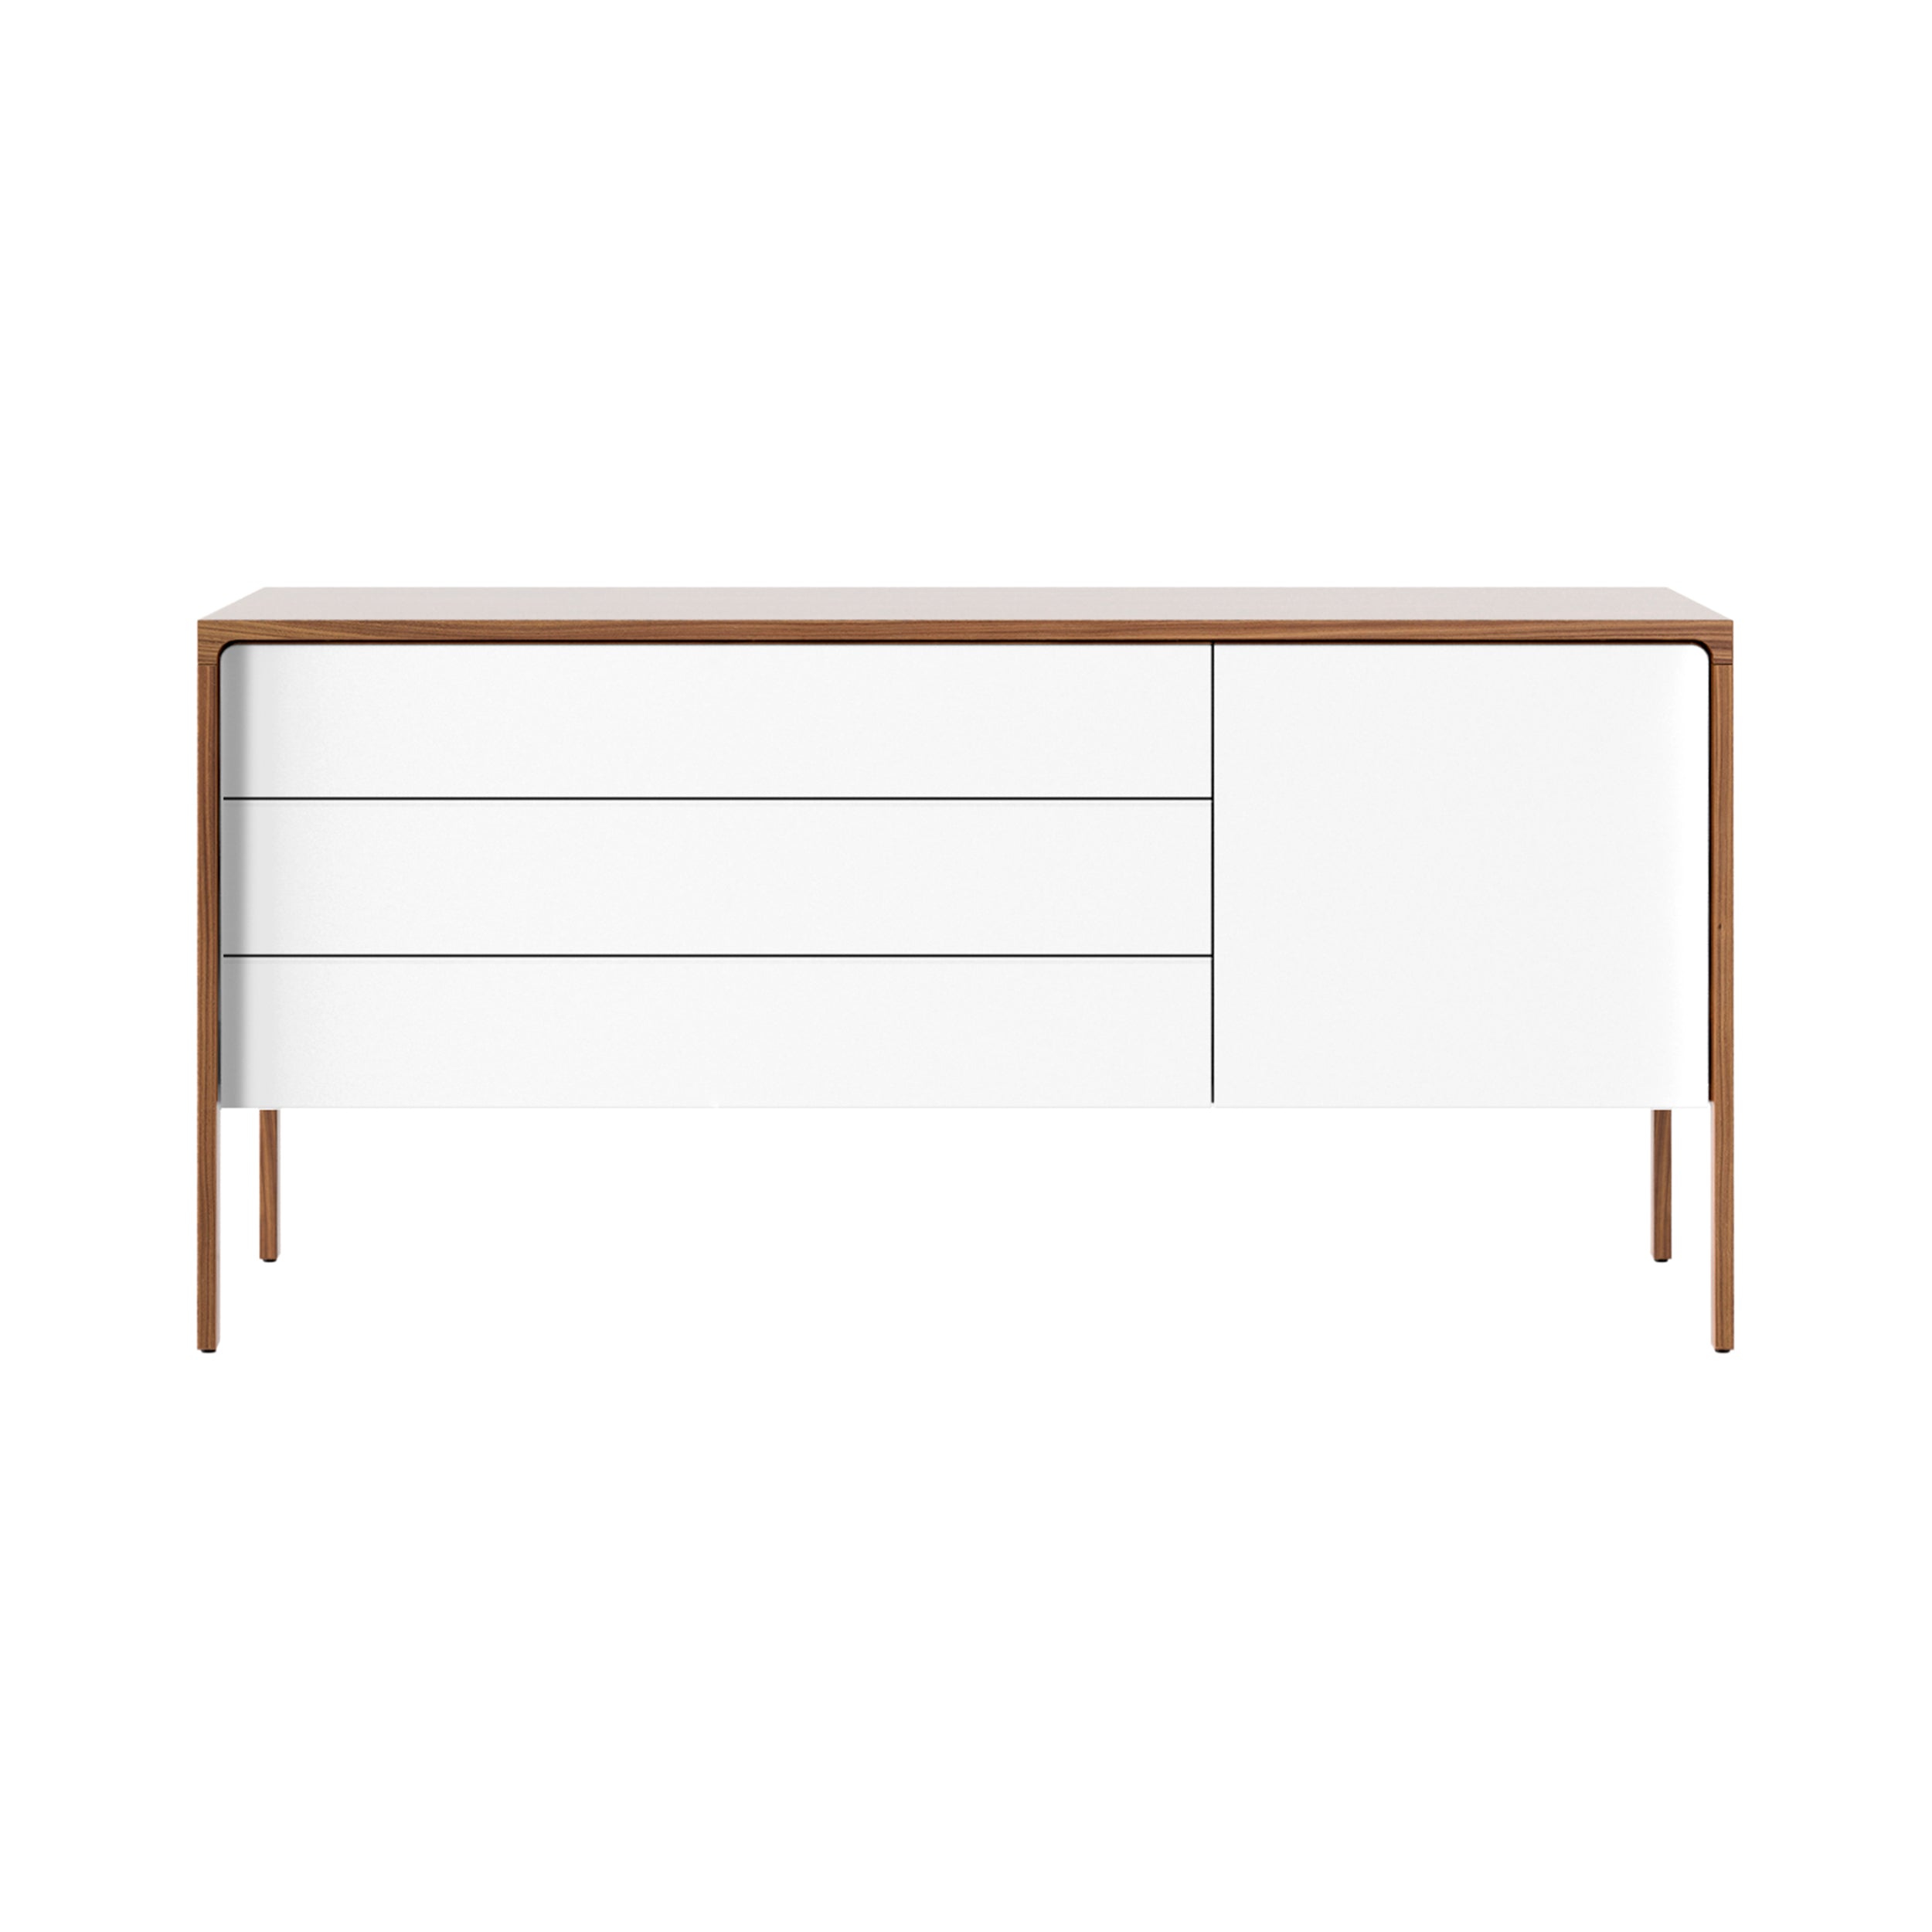 Tactile Sideboard: TAC211 + White Texturised Lacquered + Super-Matt Walnut